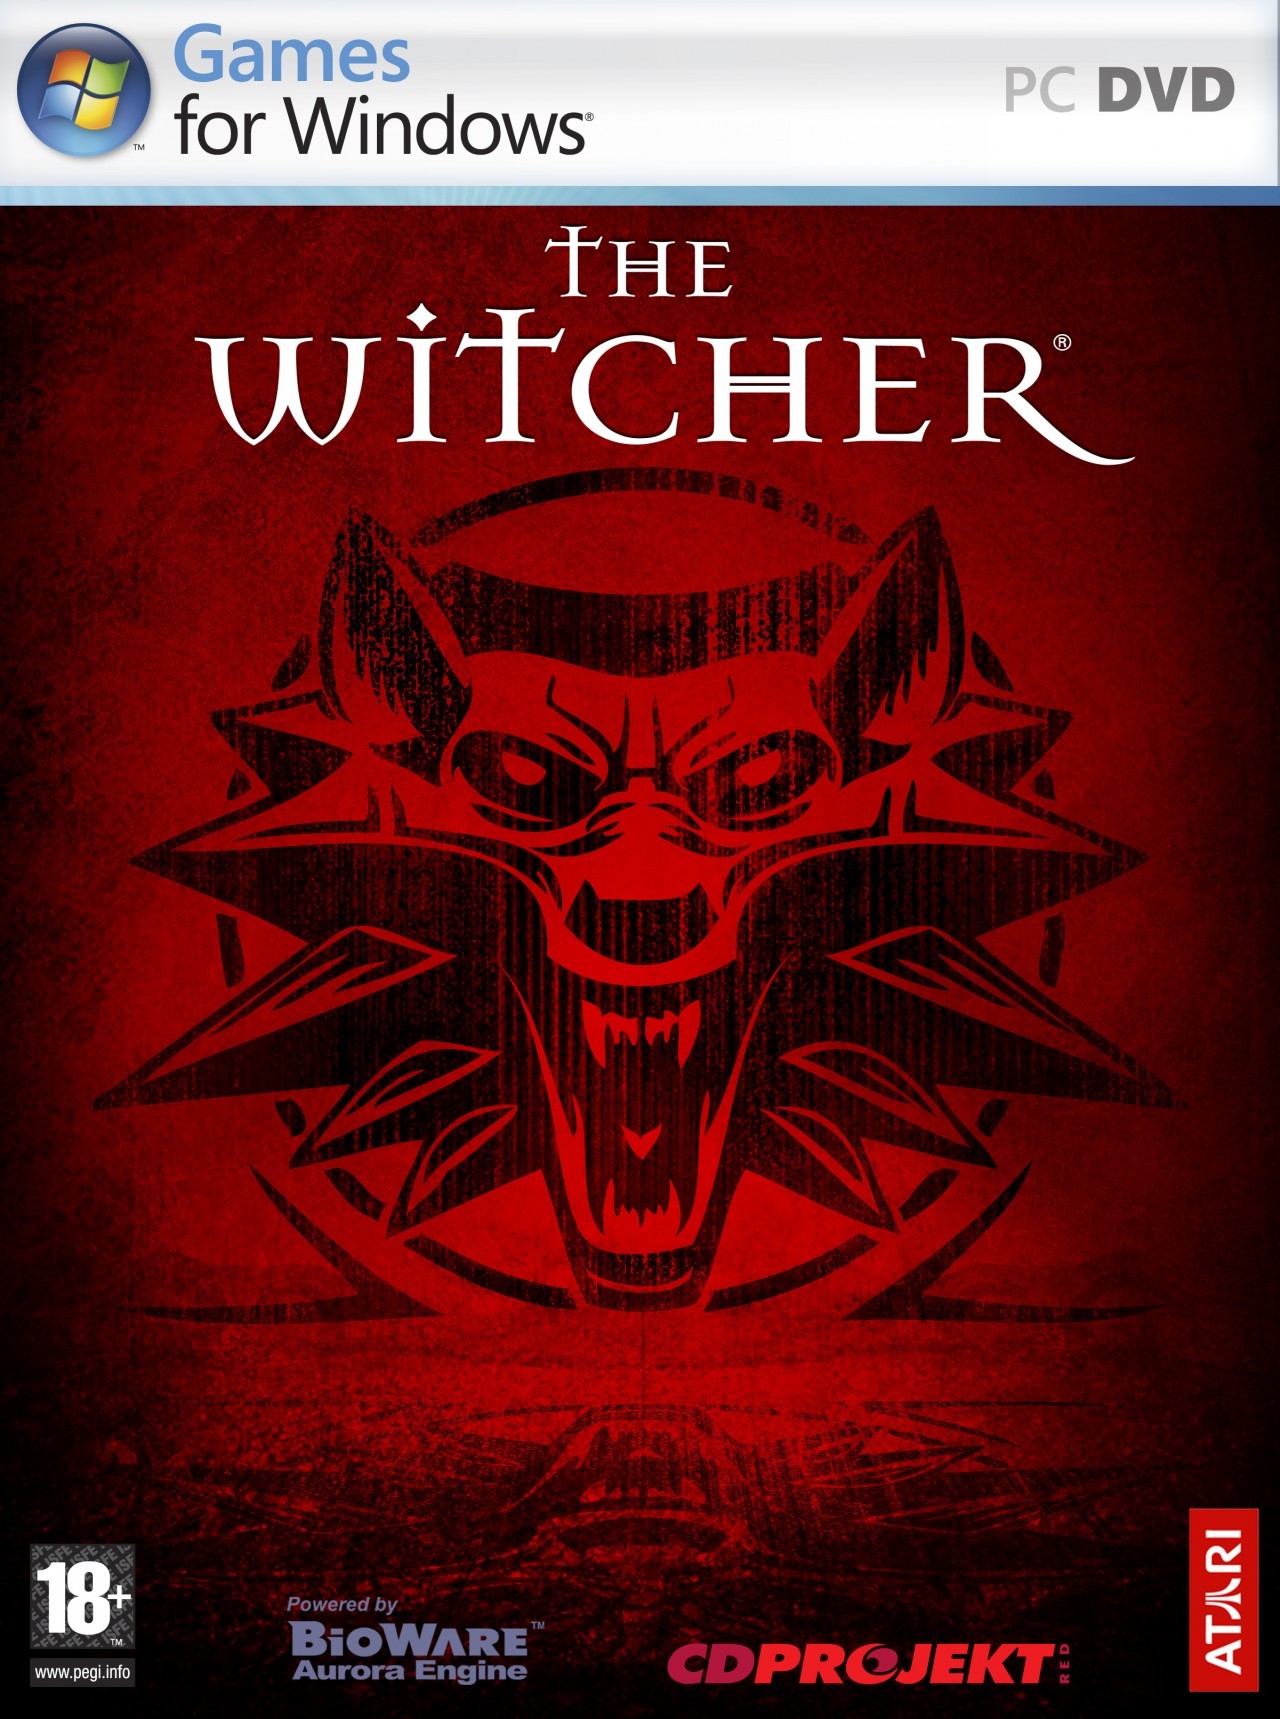 The witcher 2 ps3 playstore